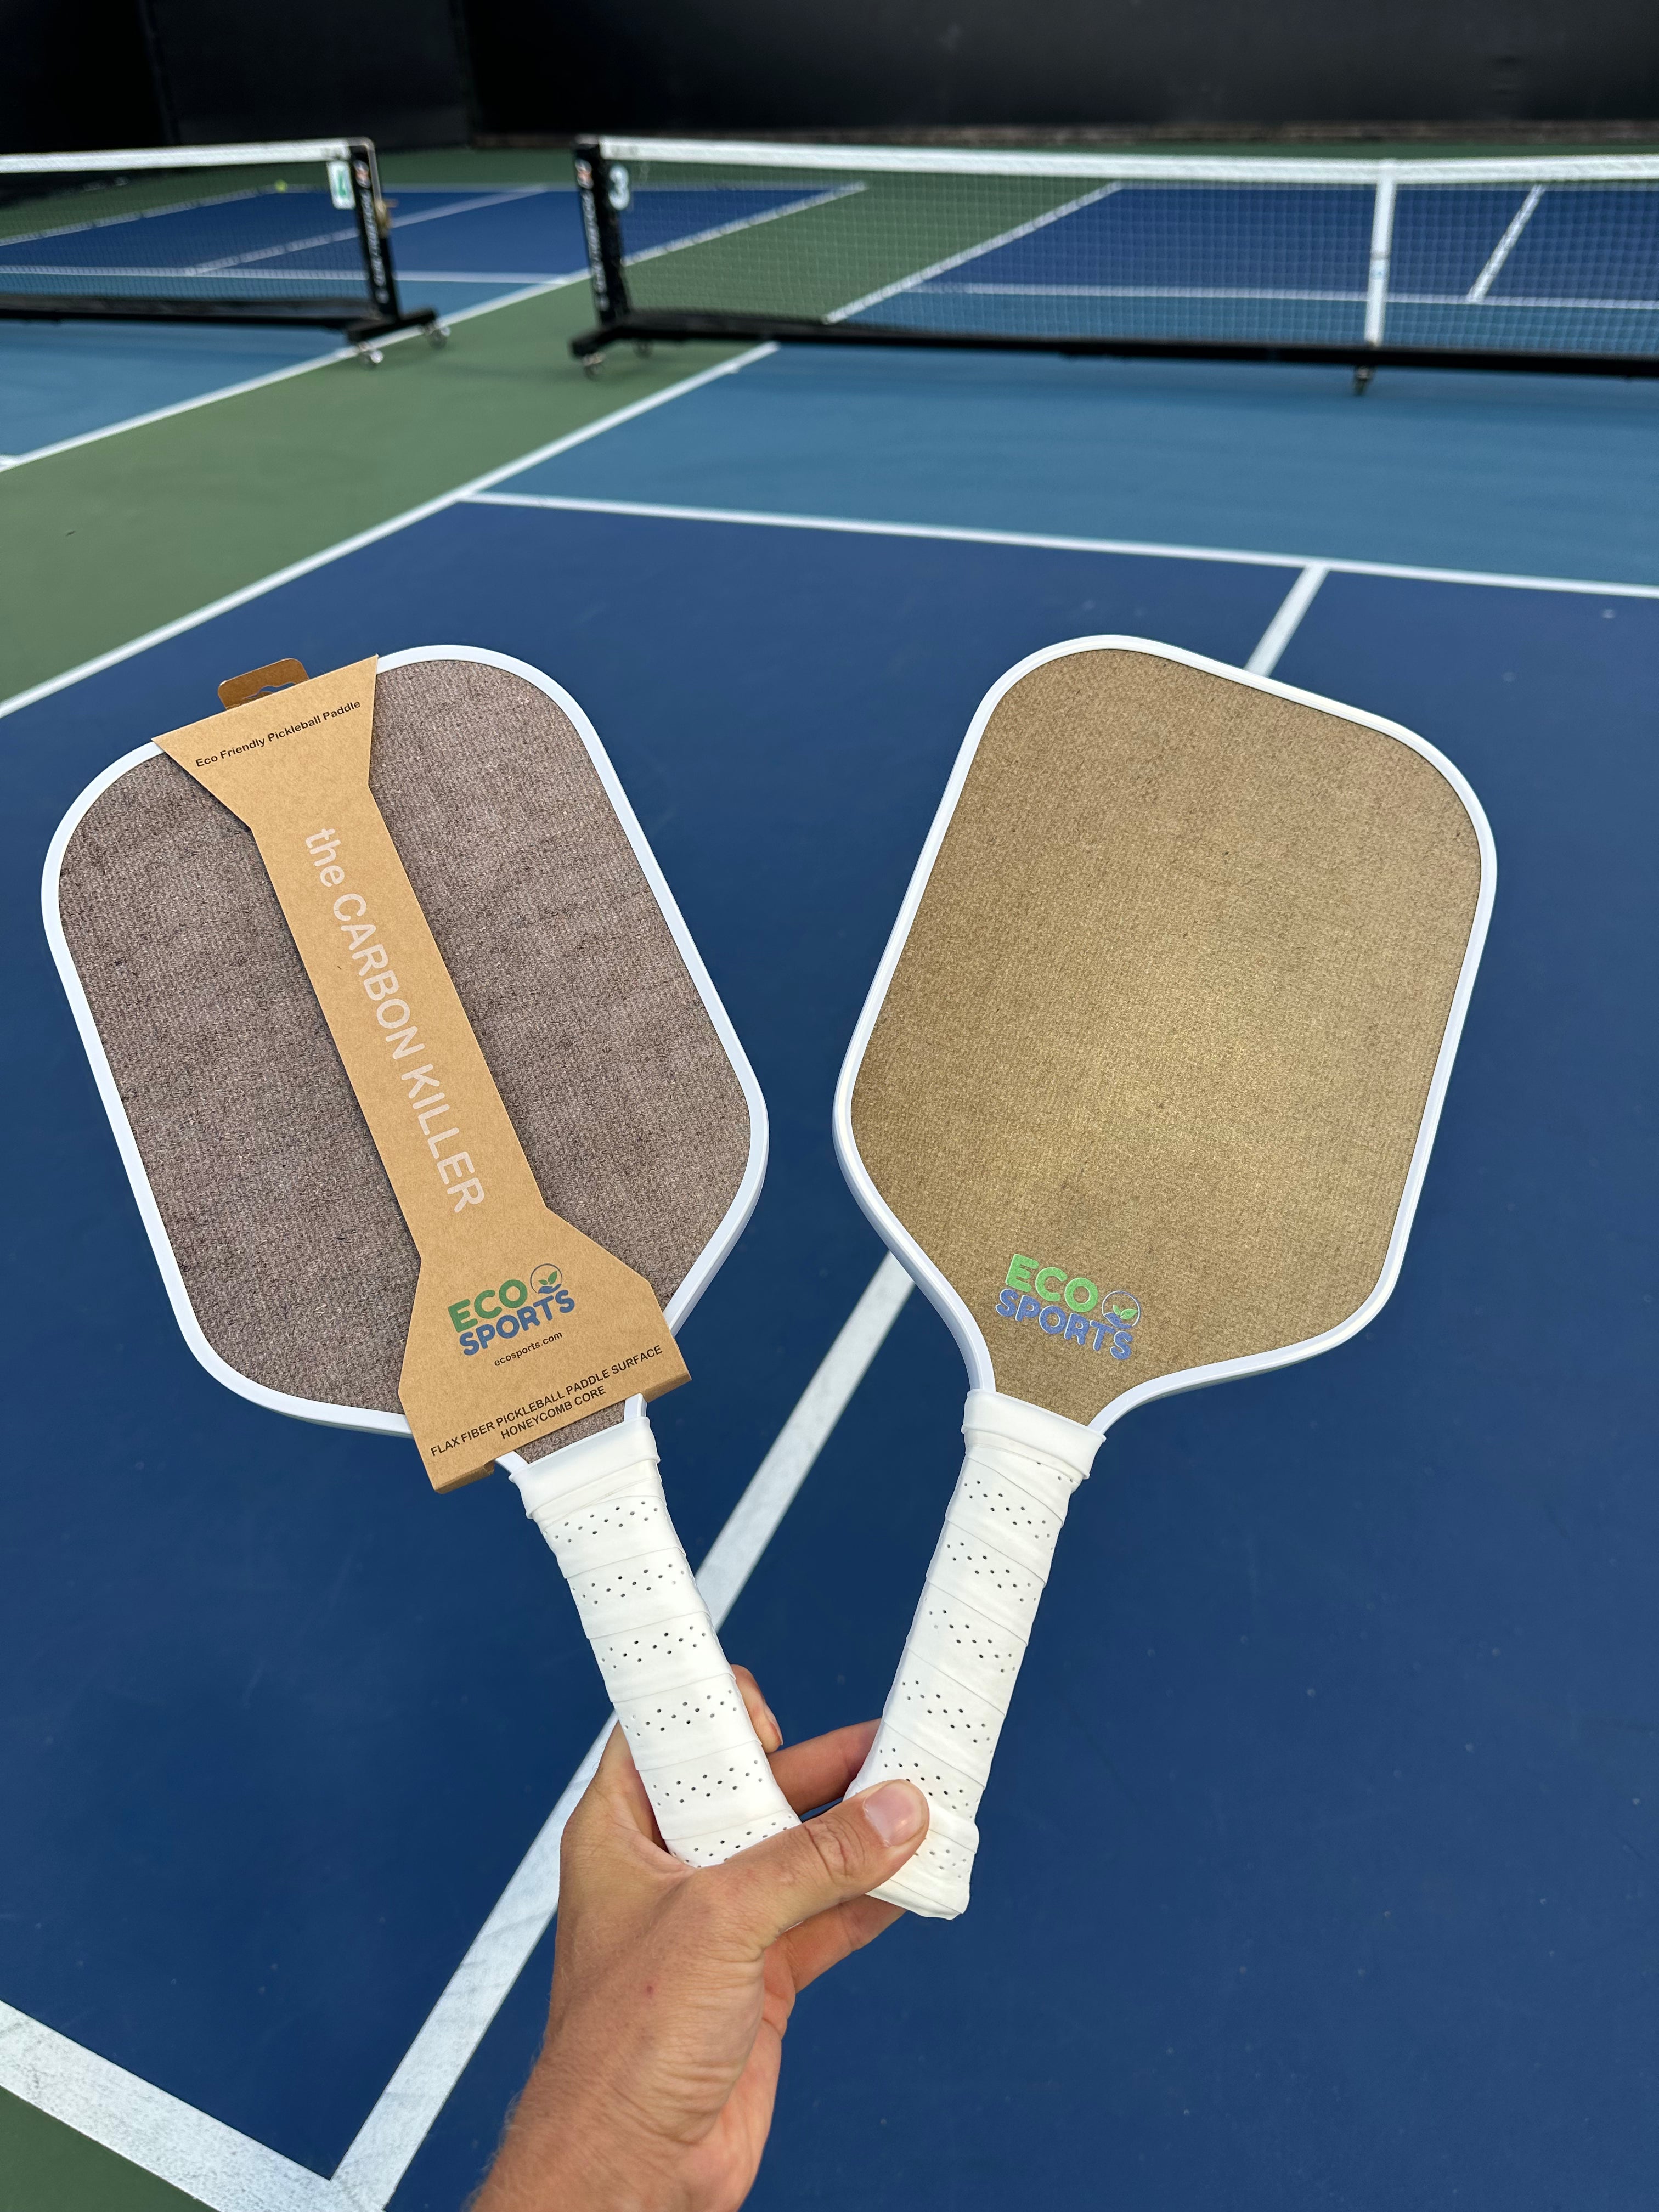 Eco-Friendly 10 Wholesale Pickleball Paddles In Bulk | Clubs Retail & Team